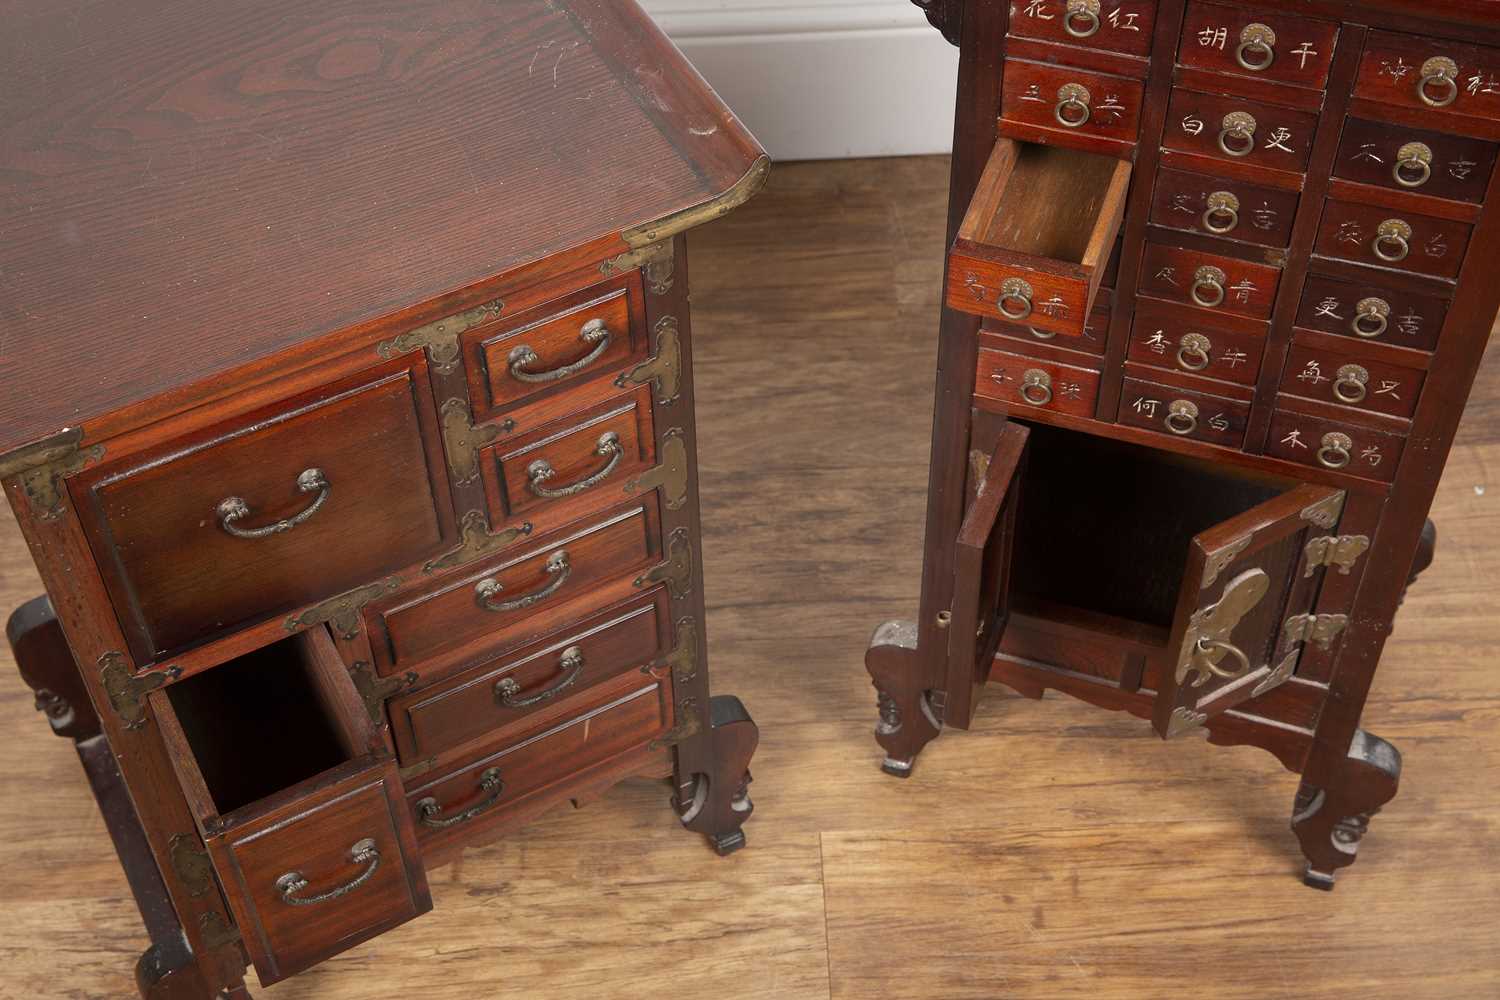 Two small sets of drawers Chinese, one 47cm wide x 75cm high x 25cm deep and the other 44.5cm wide x - Image 3 of 6